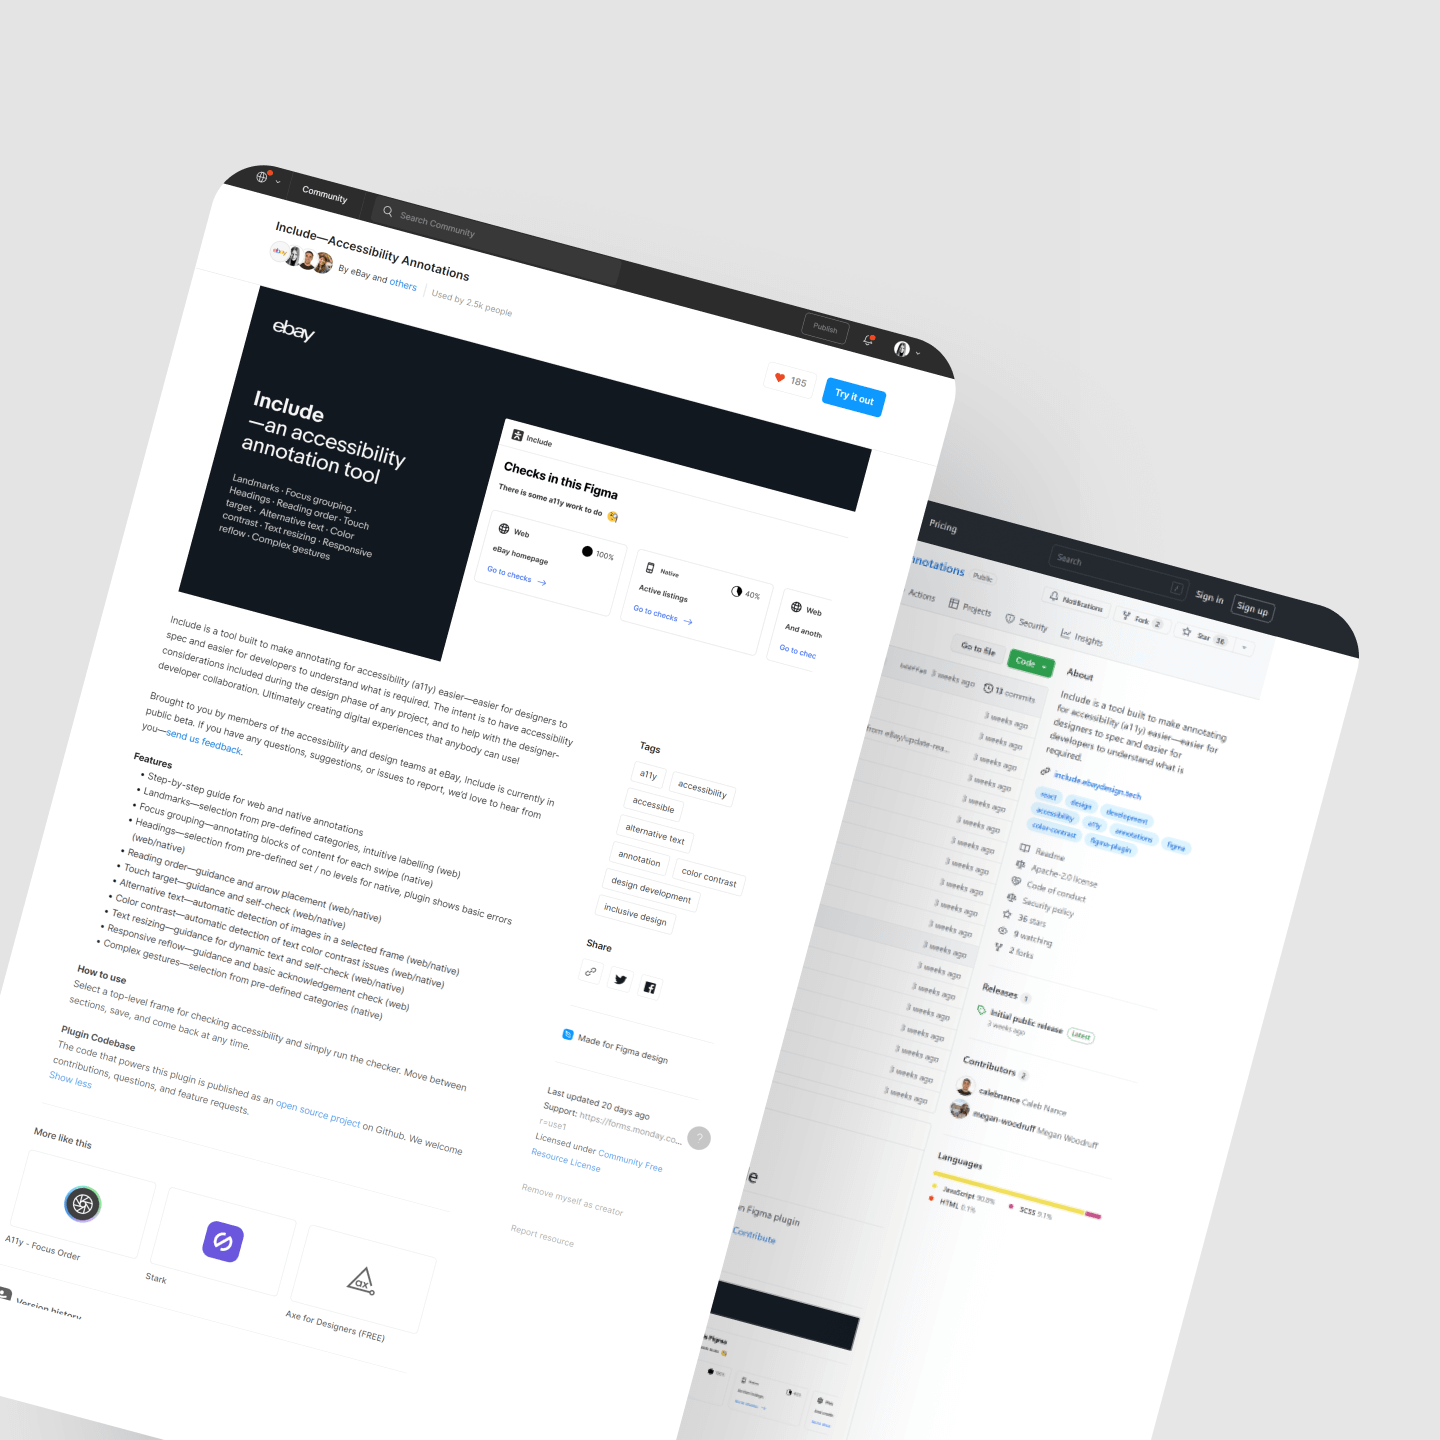 Include community page on Figma and open source code page on Github